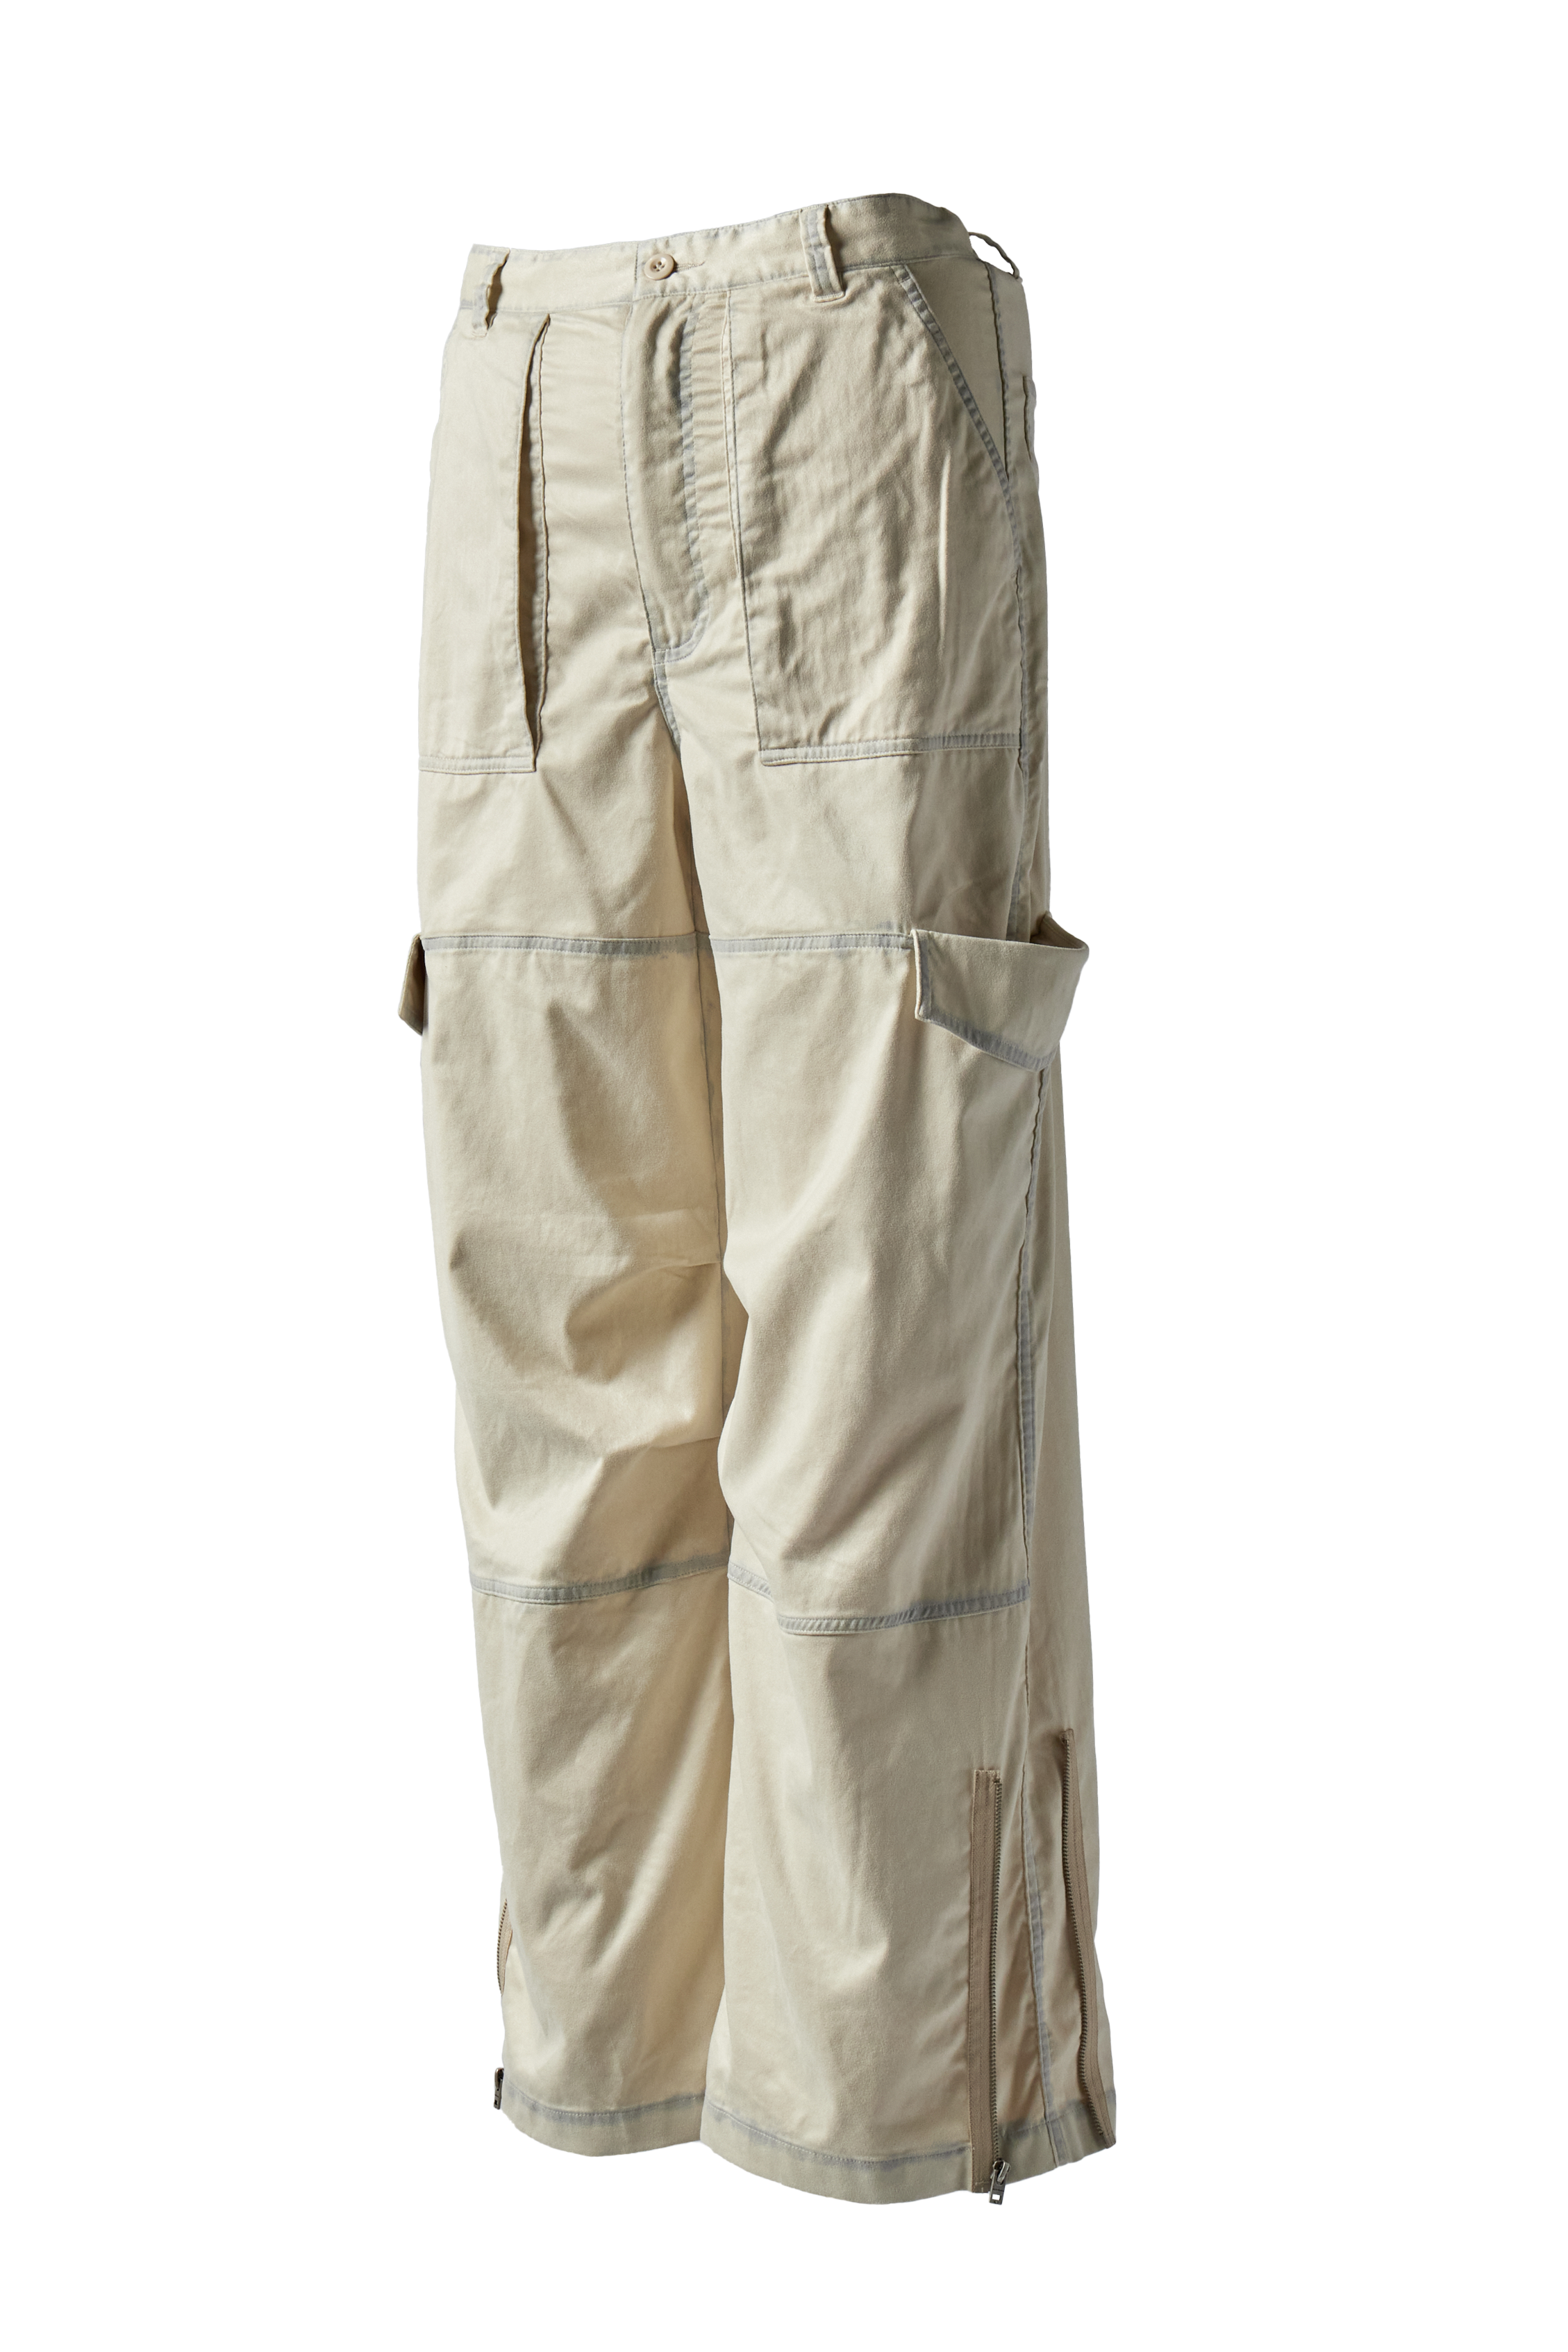 ACNE STUDIOS - Stained White Zip Trouser product image